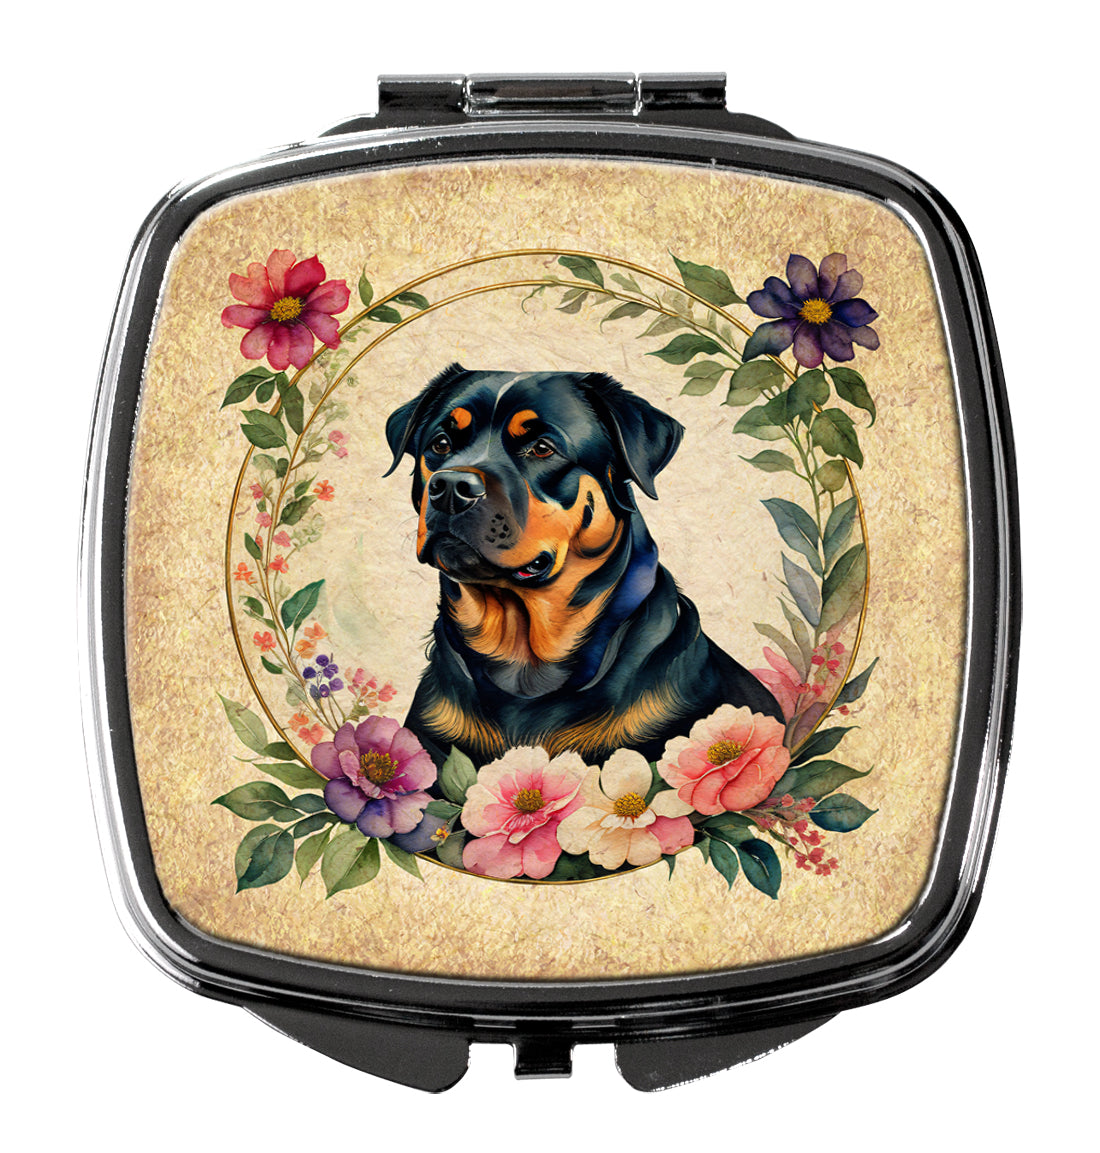 Buy this Rottweiler and Flowers Compact Mirror